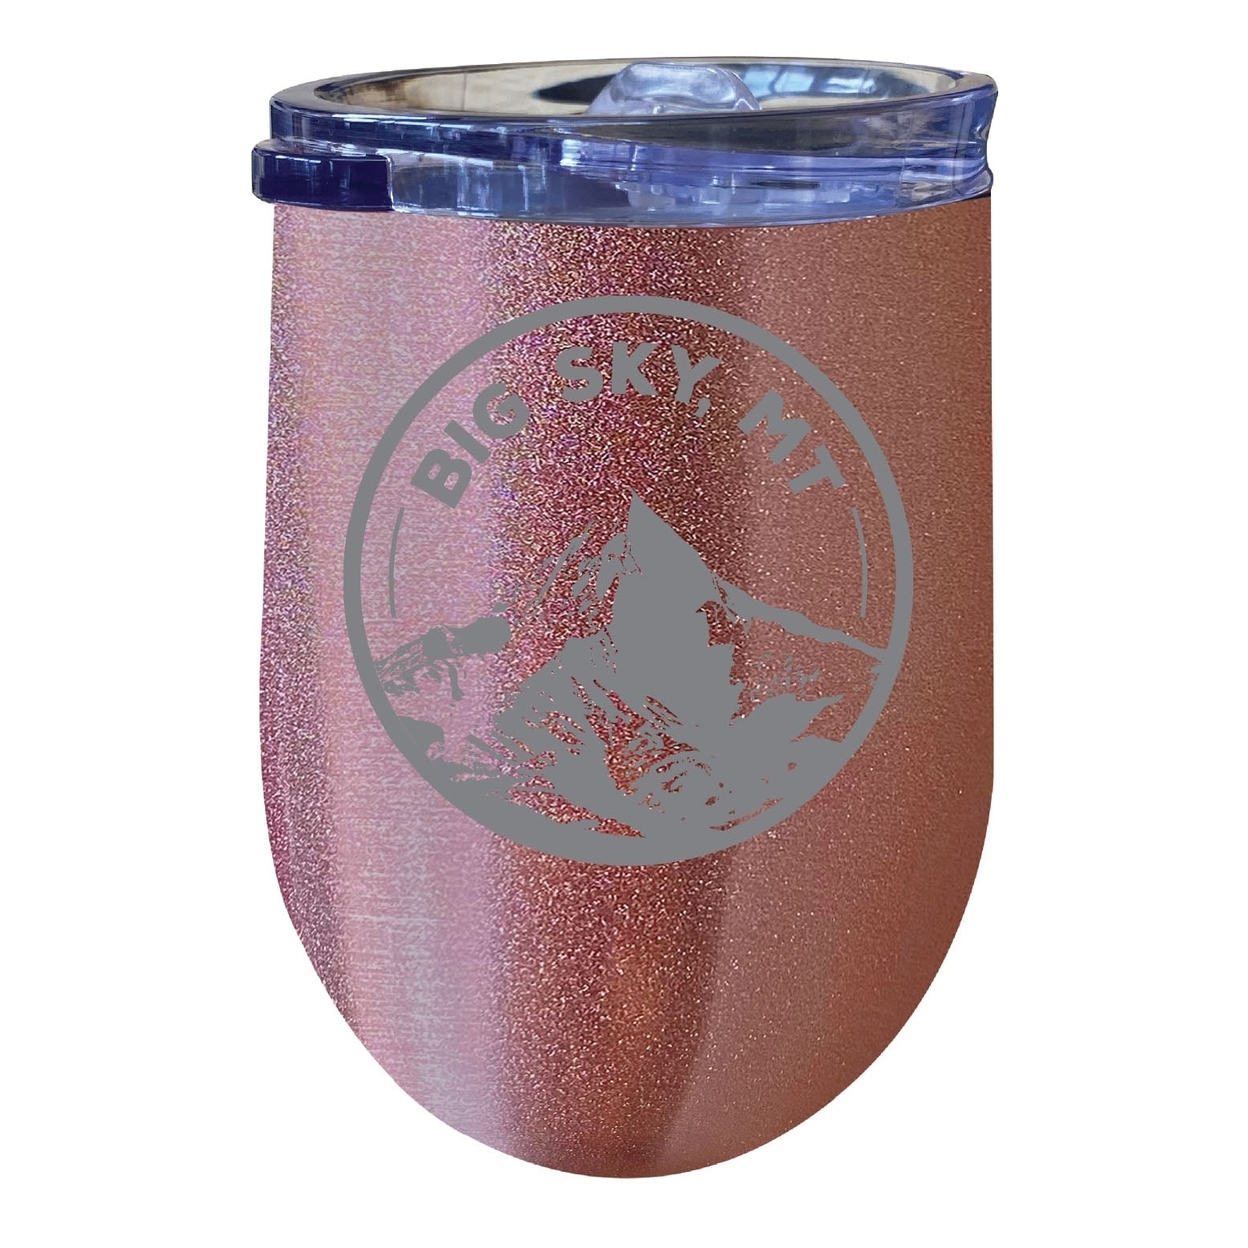 Big Sky Montana Souvenir 12 Oz Engraved Insulated Wine Stainless Steel Tumbler - Rose Gold,,2-Pack